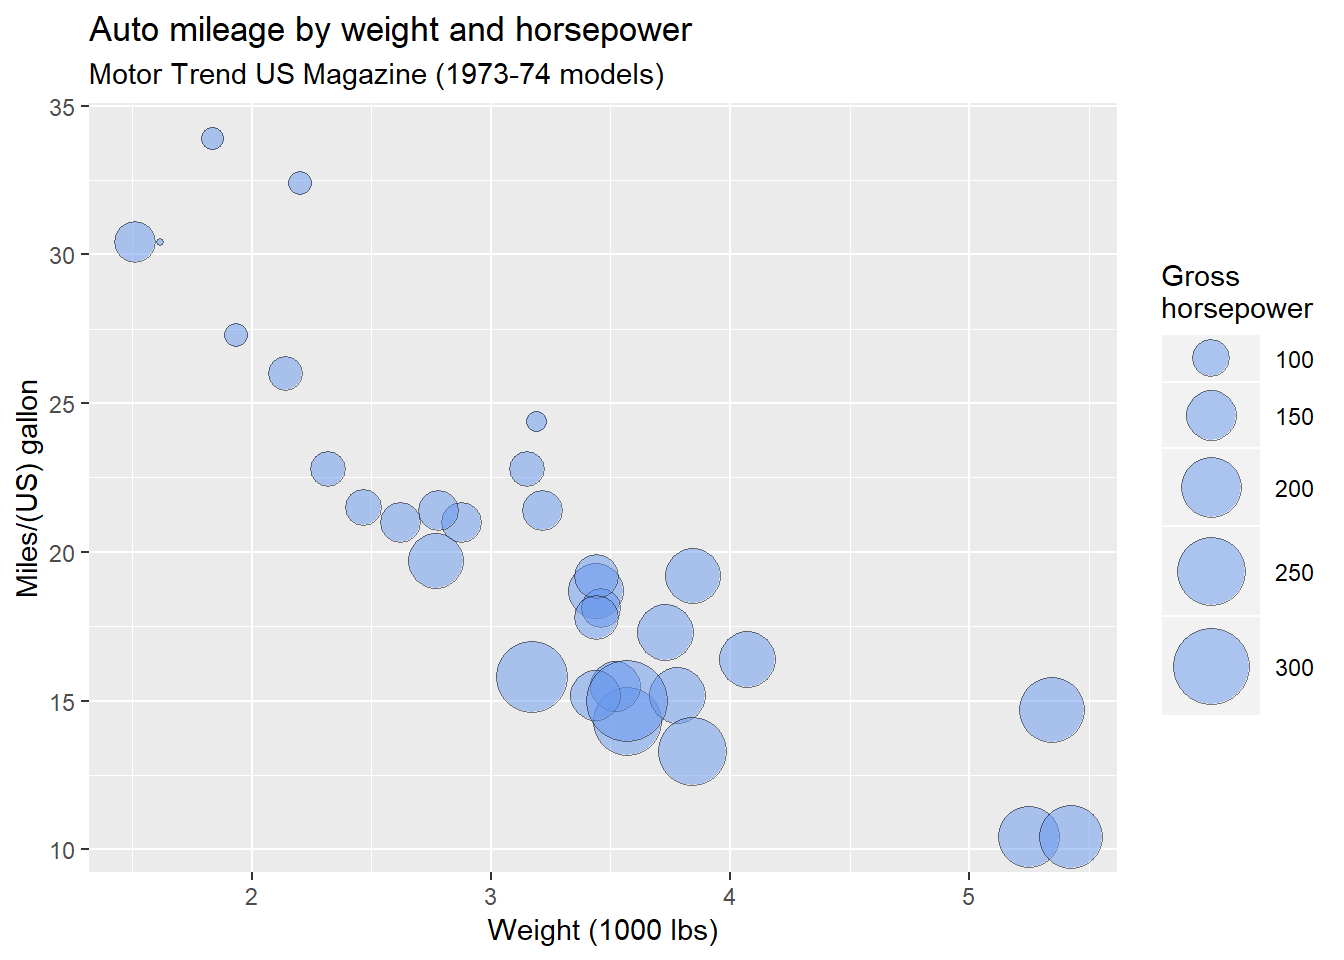 An improved bubble plot